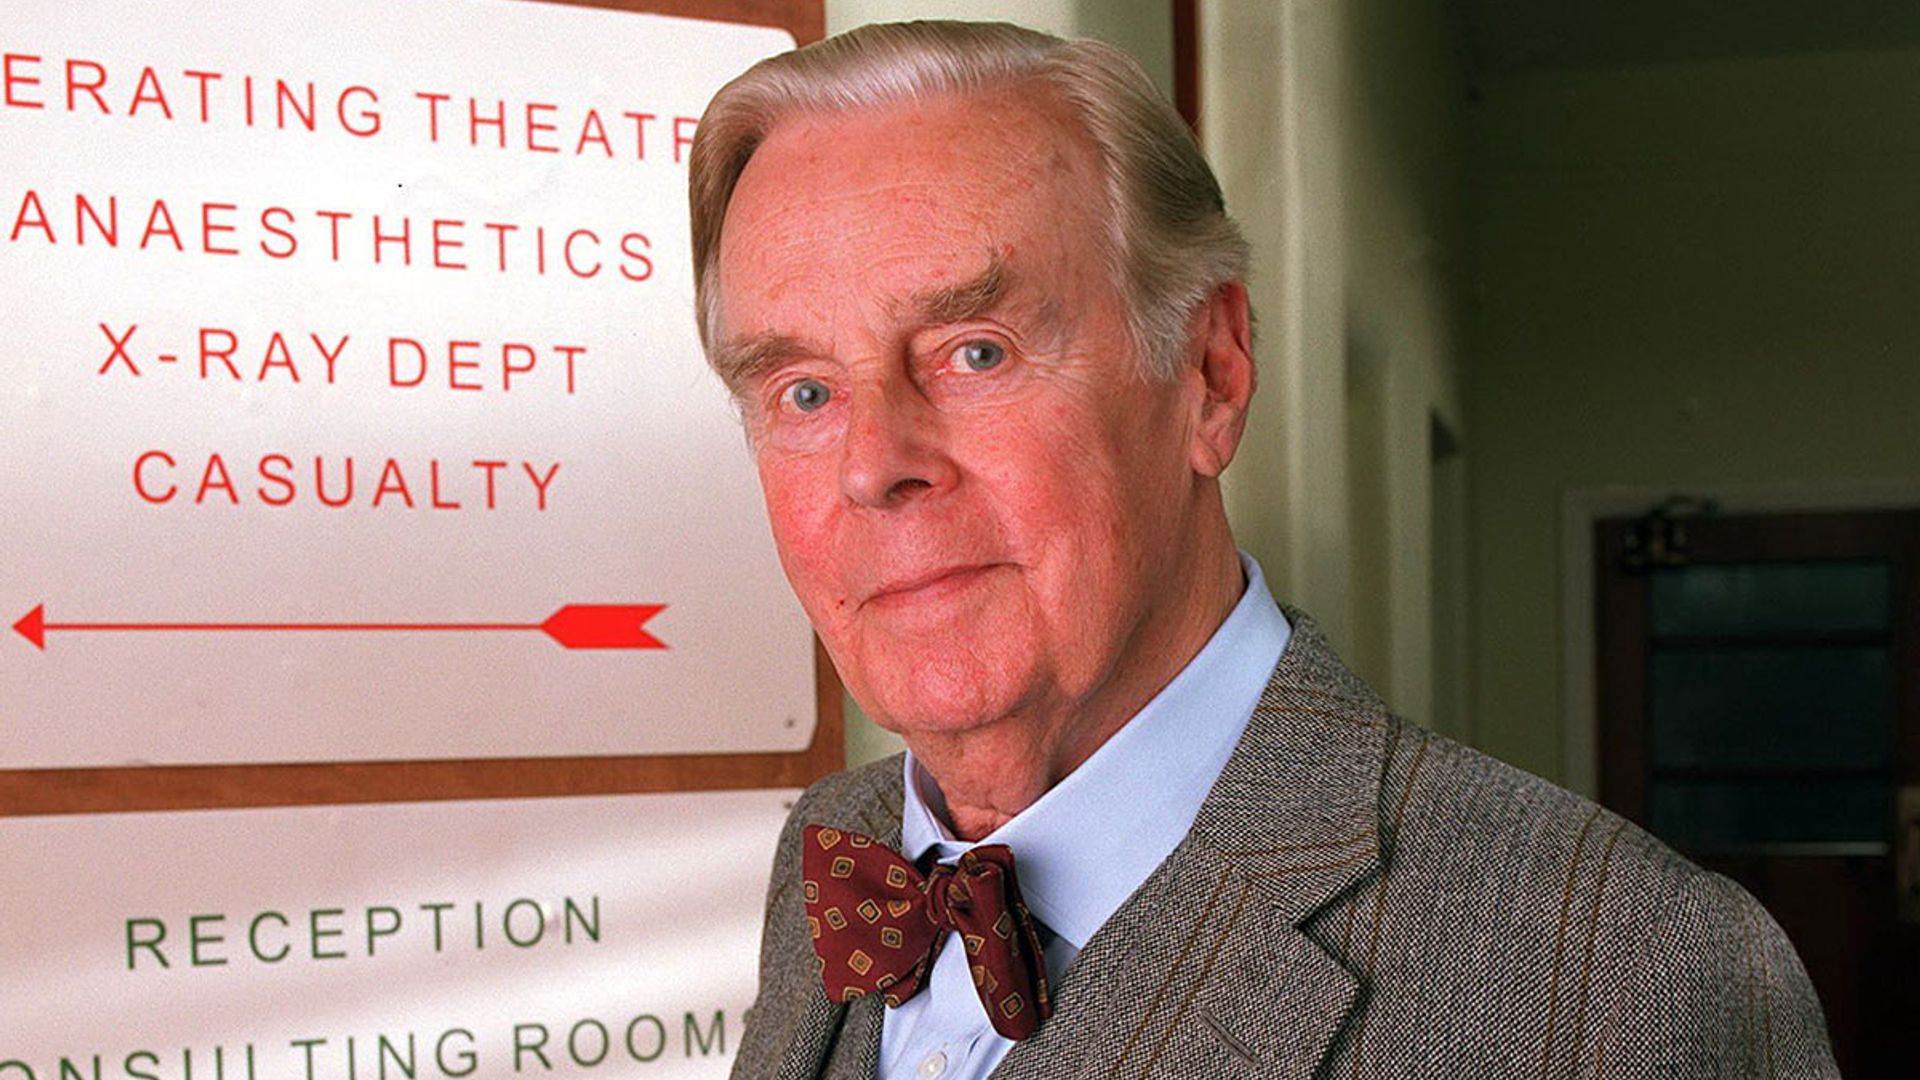 Find out what happened to Heartbeat and The Royal actor Ian Carmichael